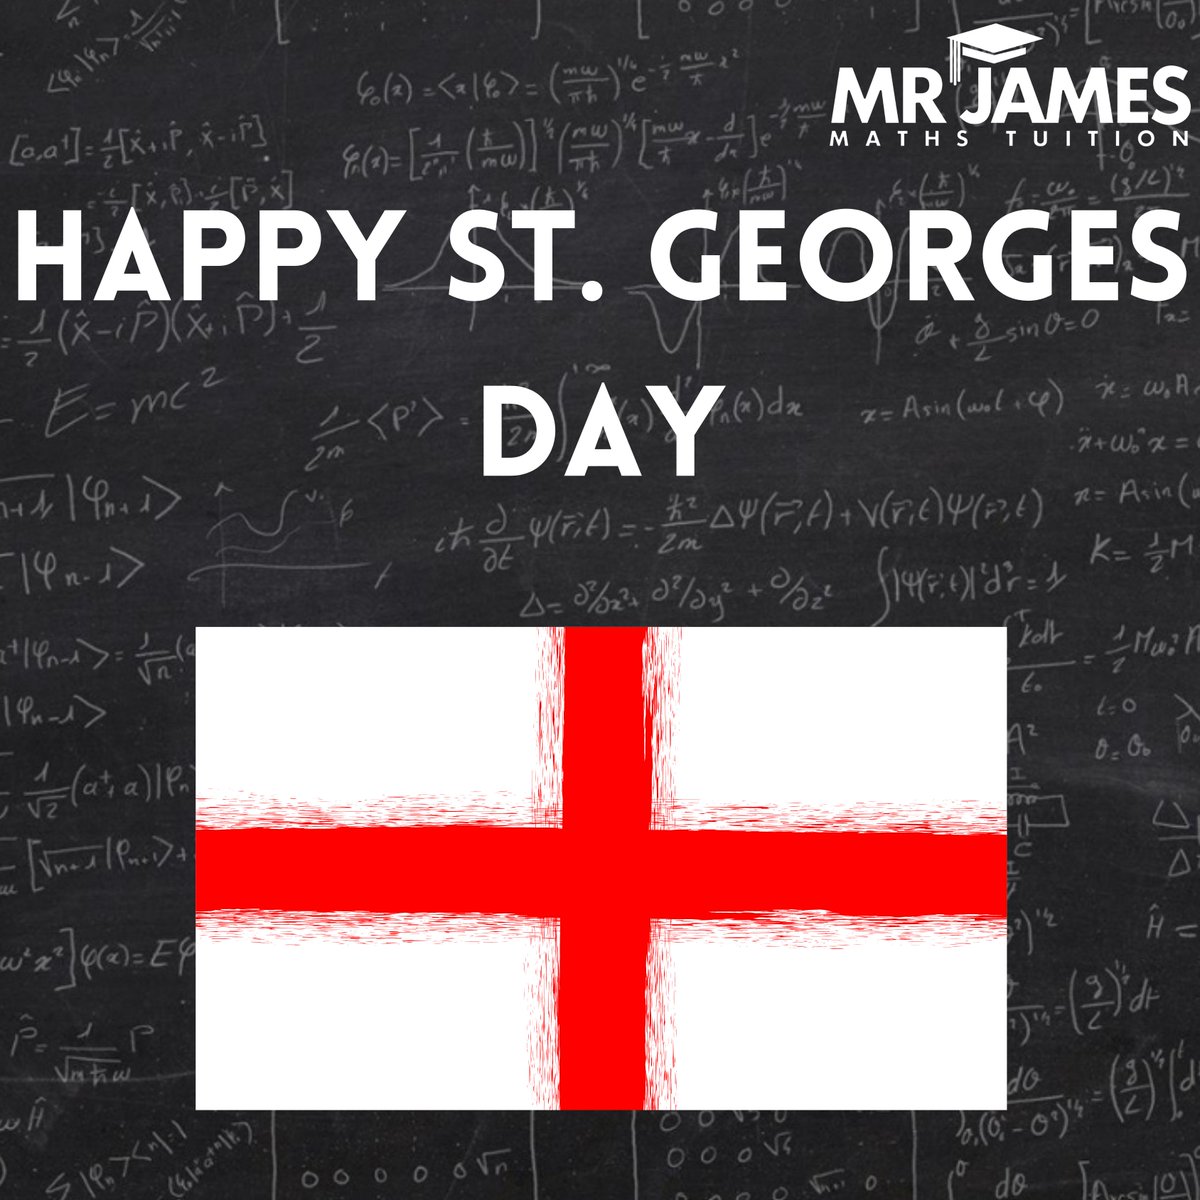 Happy St. Georges Day 🏴󠁧󠁢󠁥󠁮󠁧󠁿